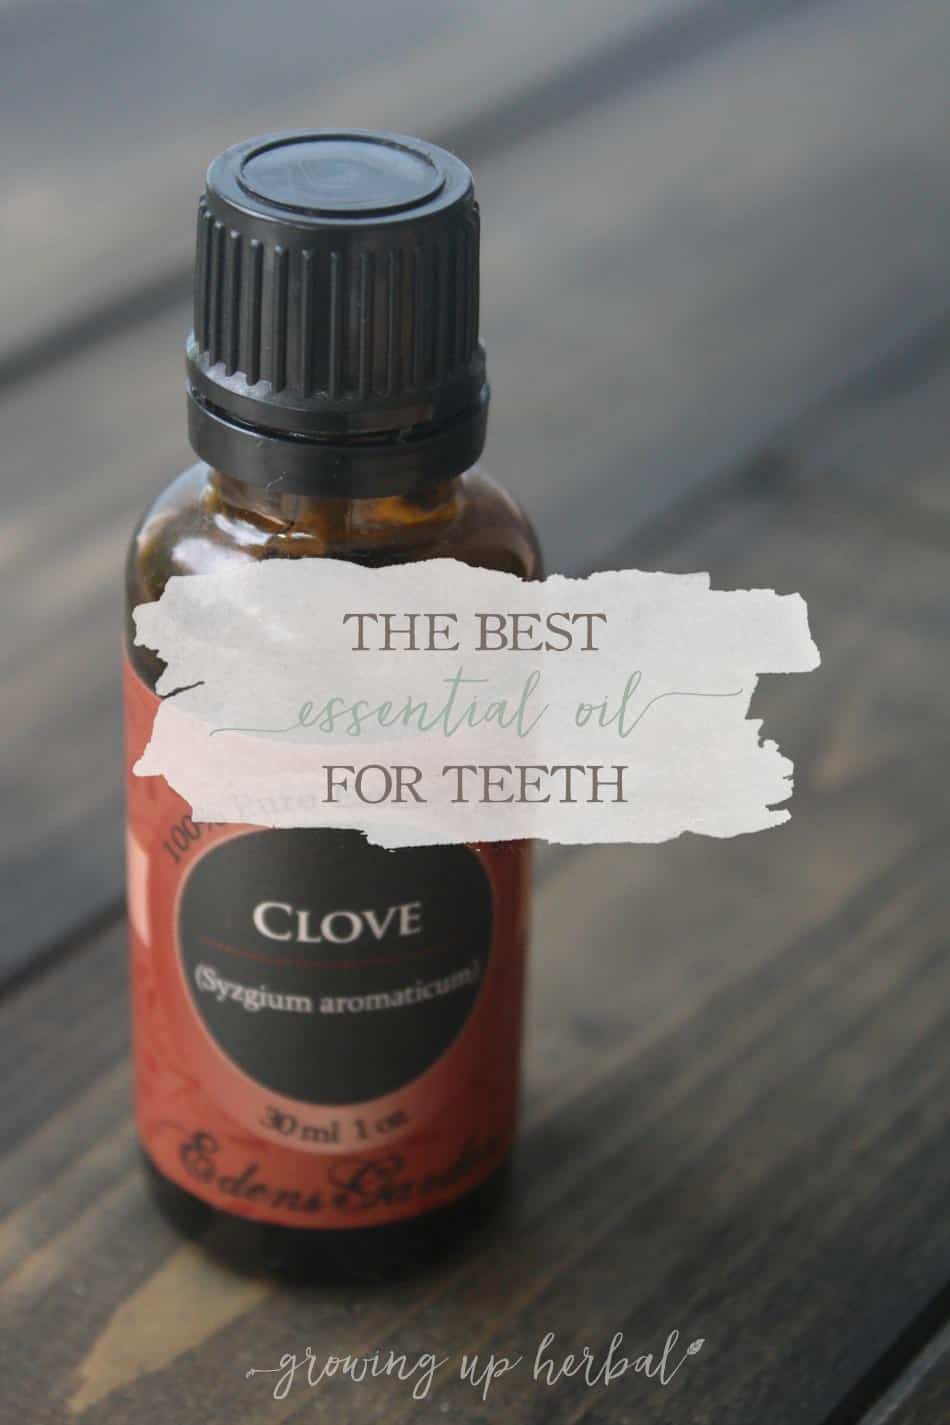 Clove oil in homemade toothpaste